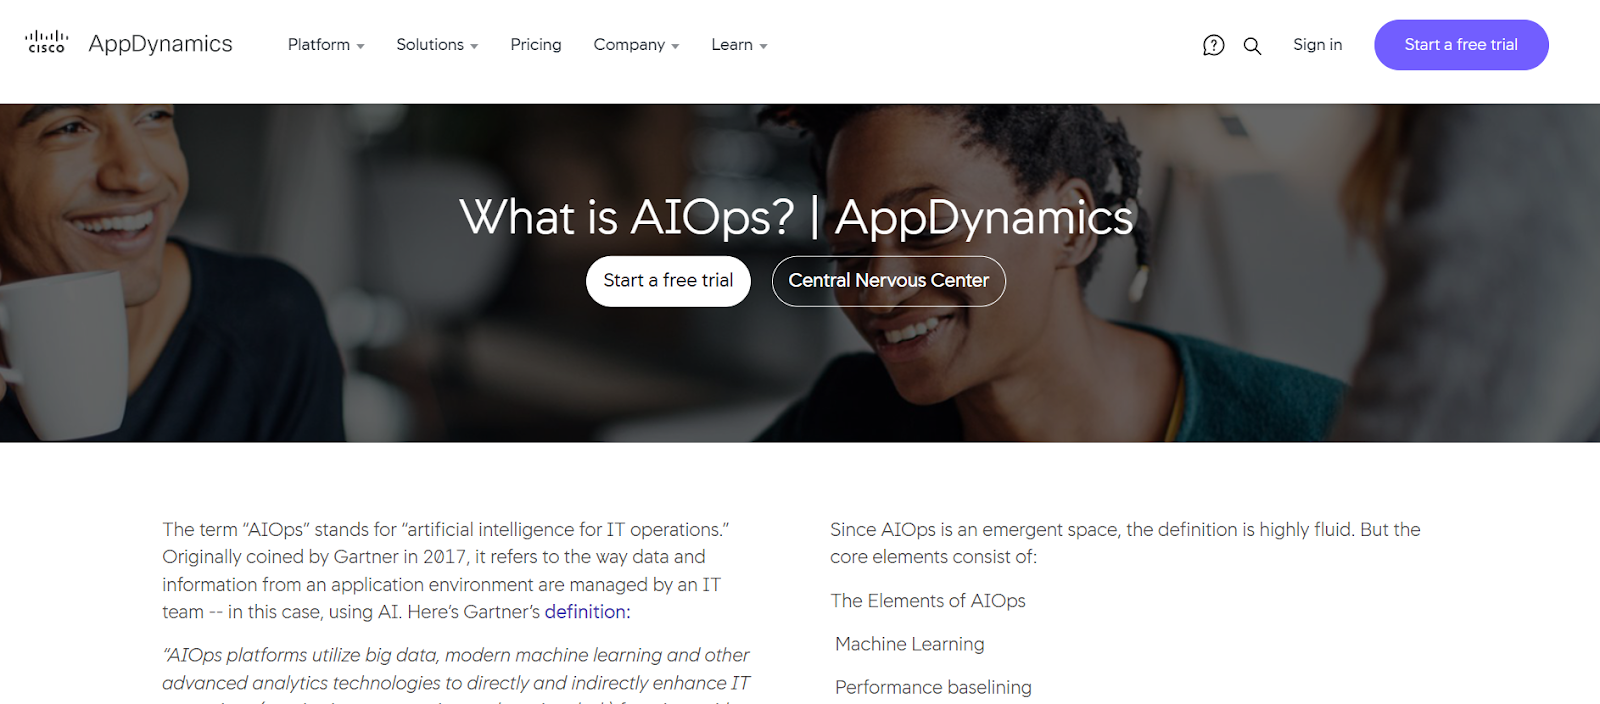 Best AIOps Tools: AppDynamics